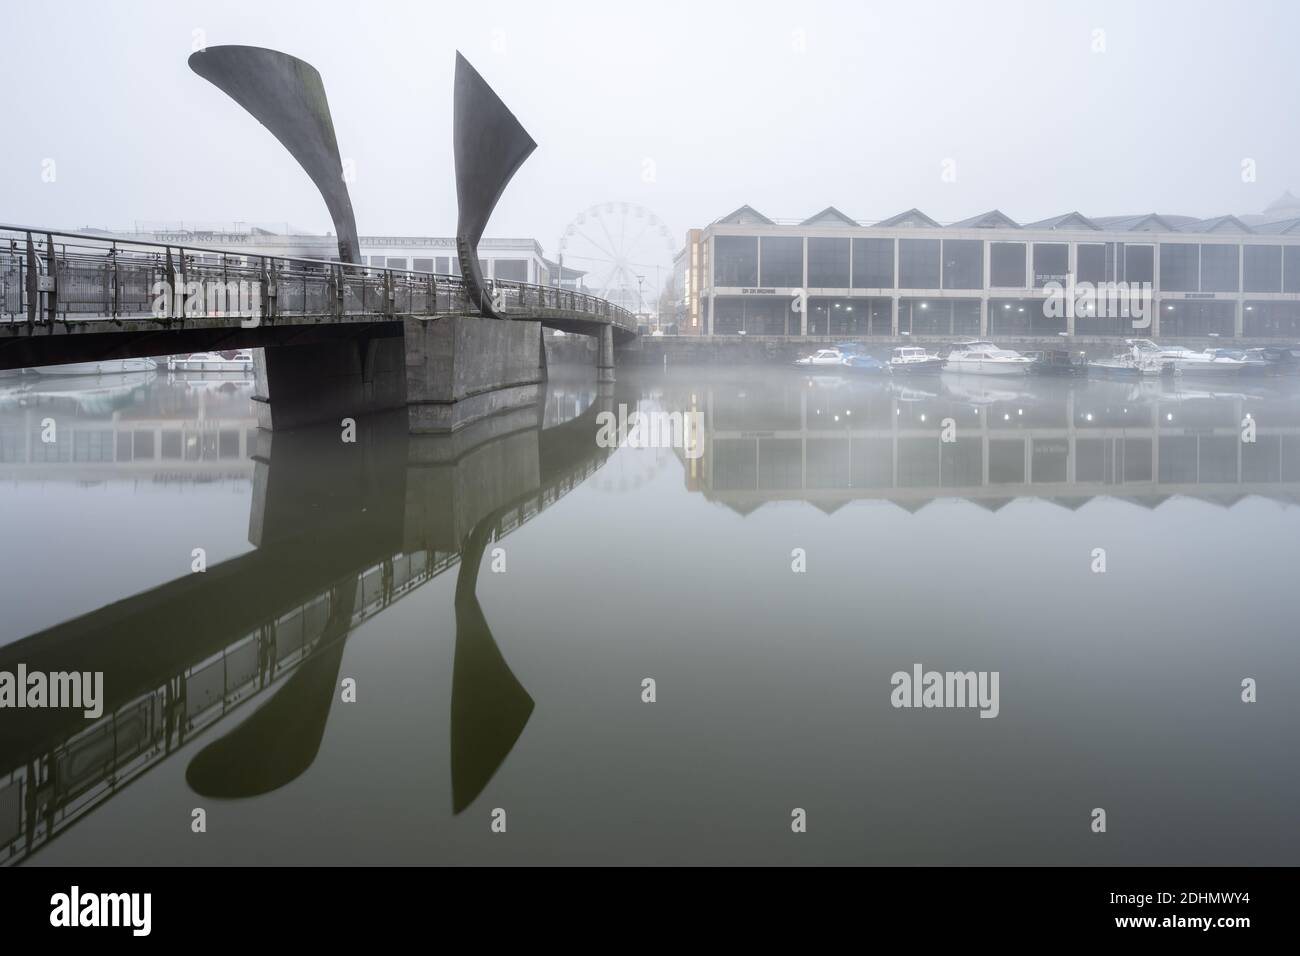 Mist hangs over the redeveloped Harbourside warehouses at Pero's Bridge on Bristol's Floating Harbour. Stock Photo